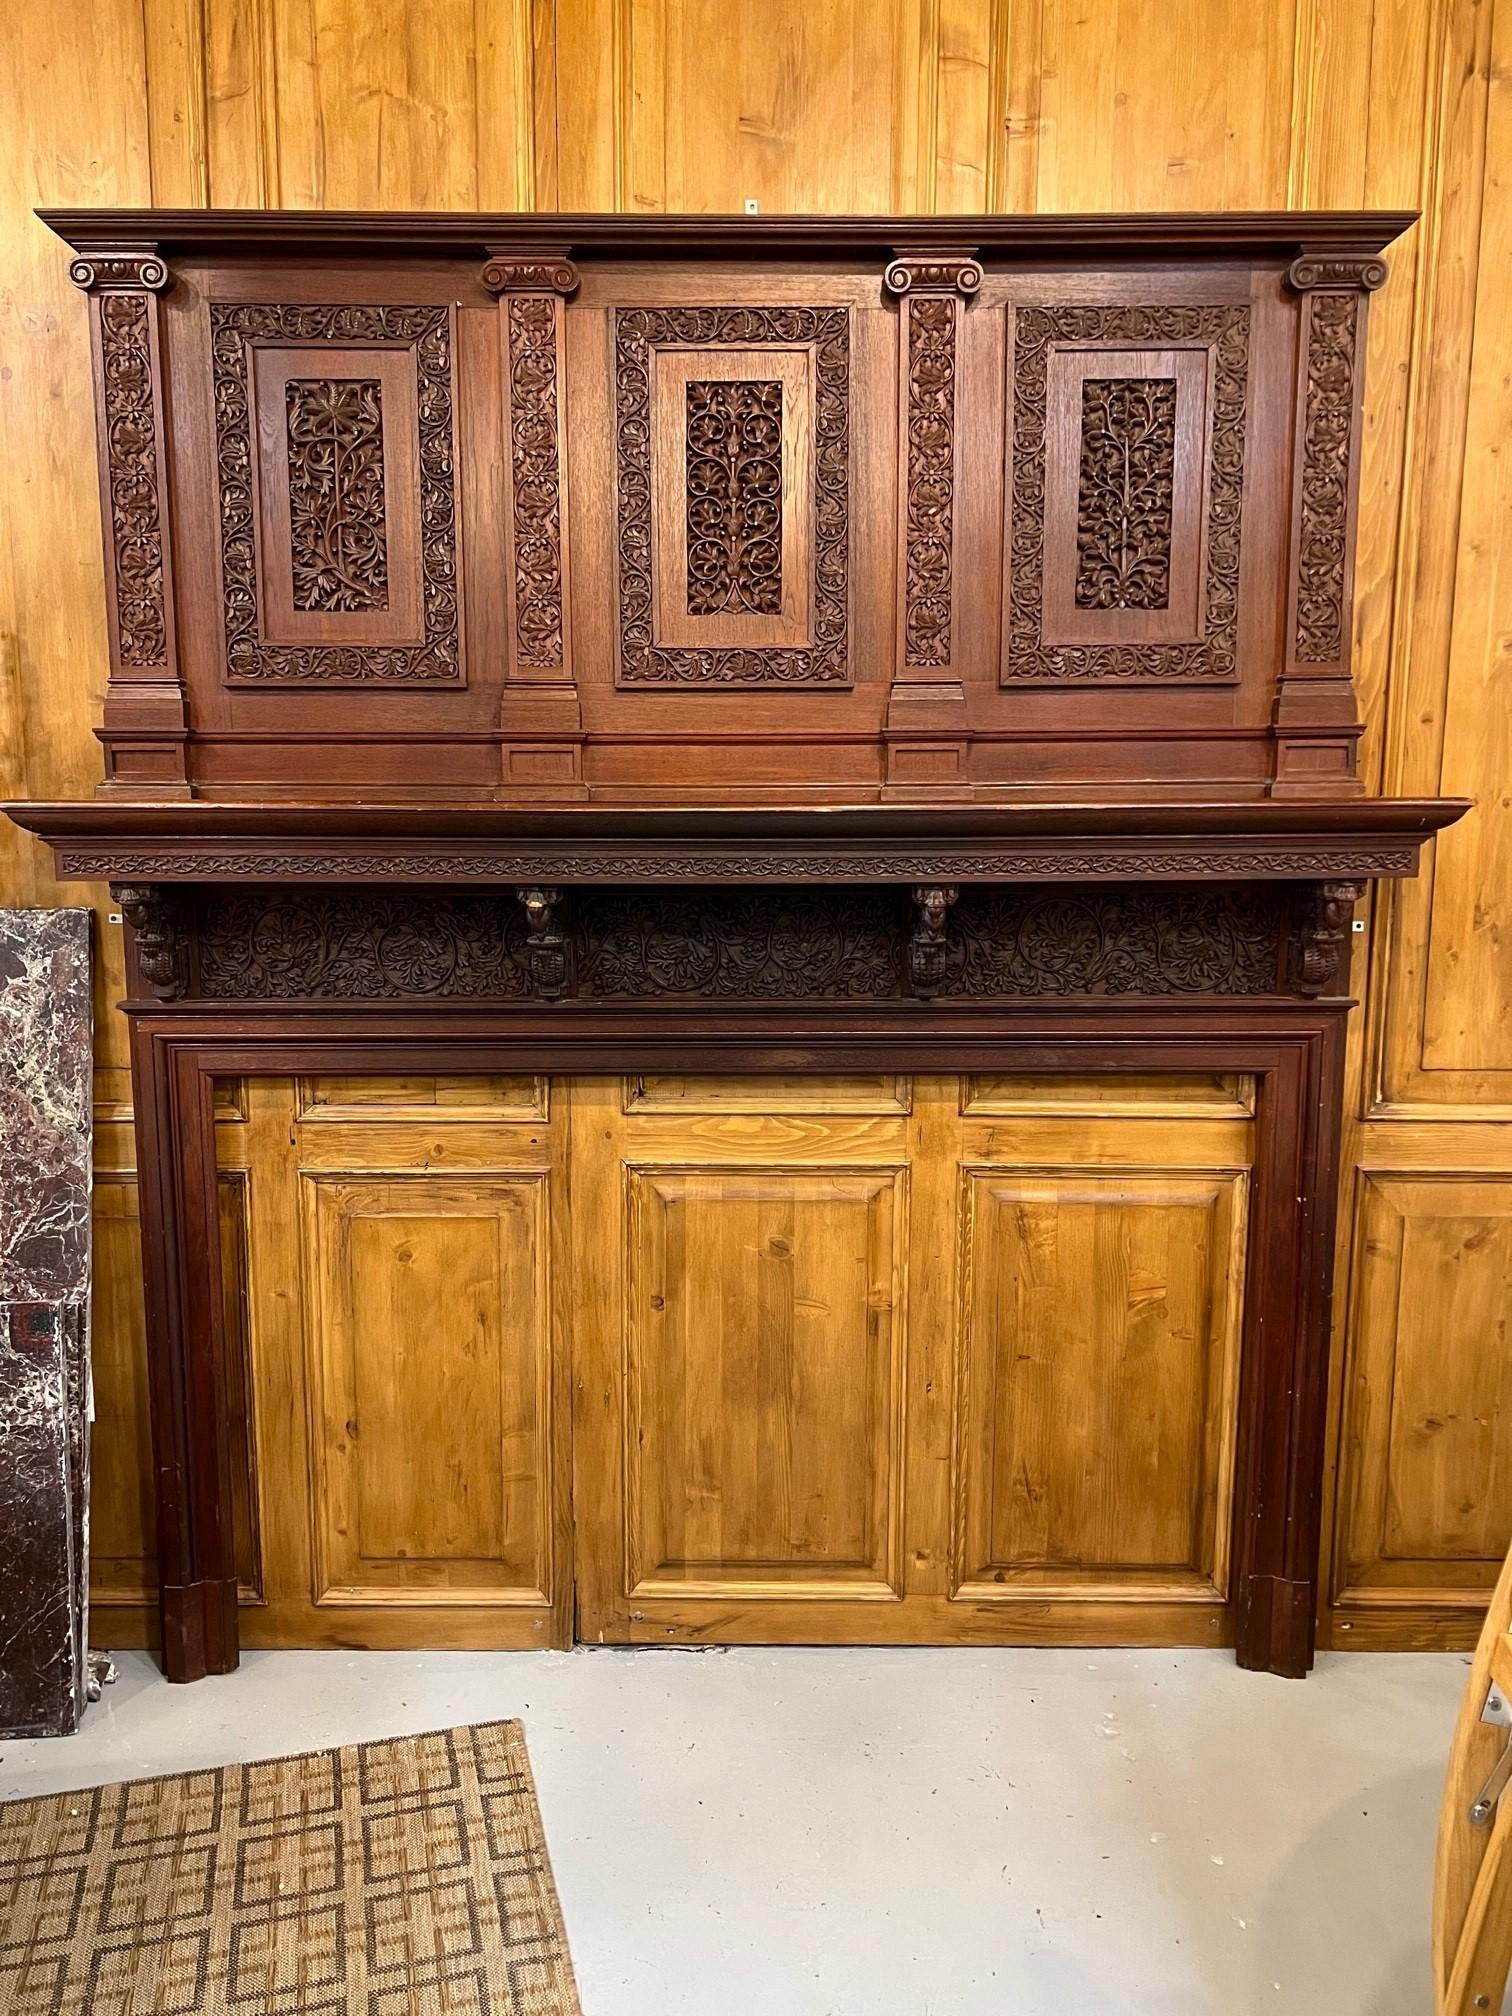 Late 19th century carved wooden fireplace mantel salvaged from a historic New Haven CT. estate. This is a beautiful hand carved wooden fireplace mantel that instead of a mirror above it has three intricately carved wooden panels. I believe the wood